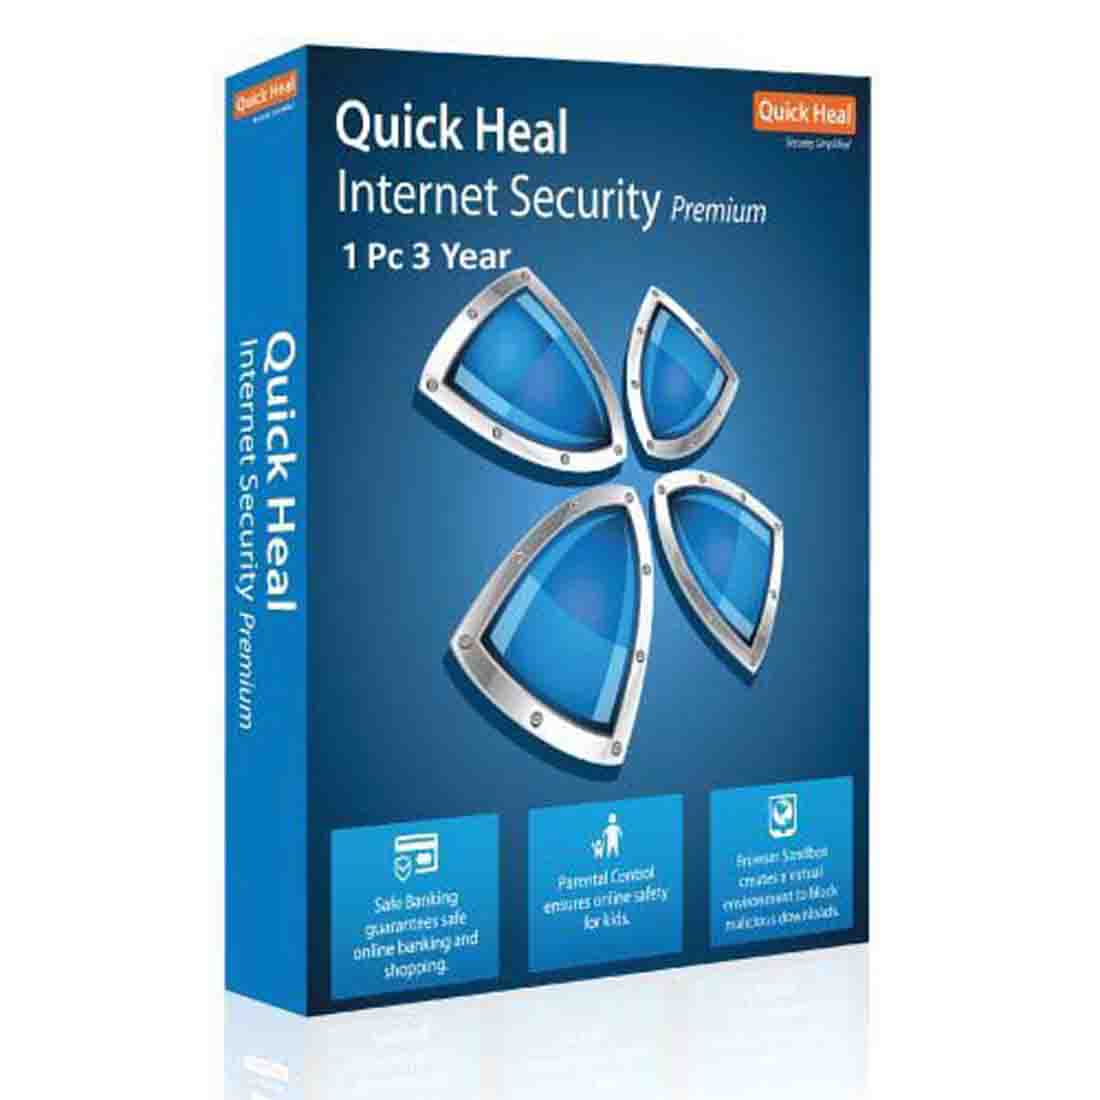 Quick Heal Internet Security 1 Pc 3Year